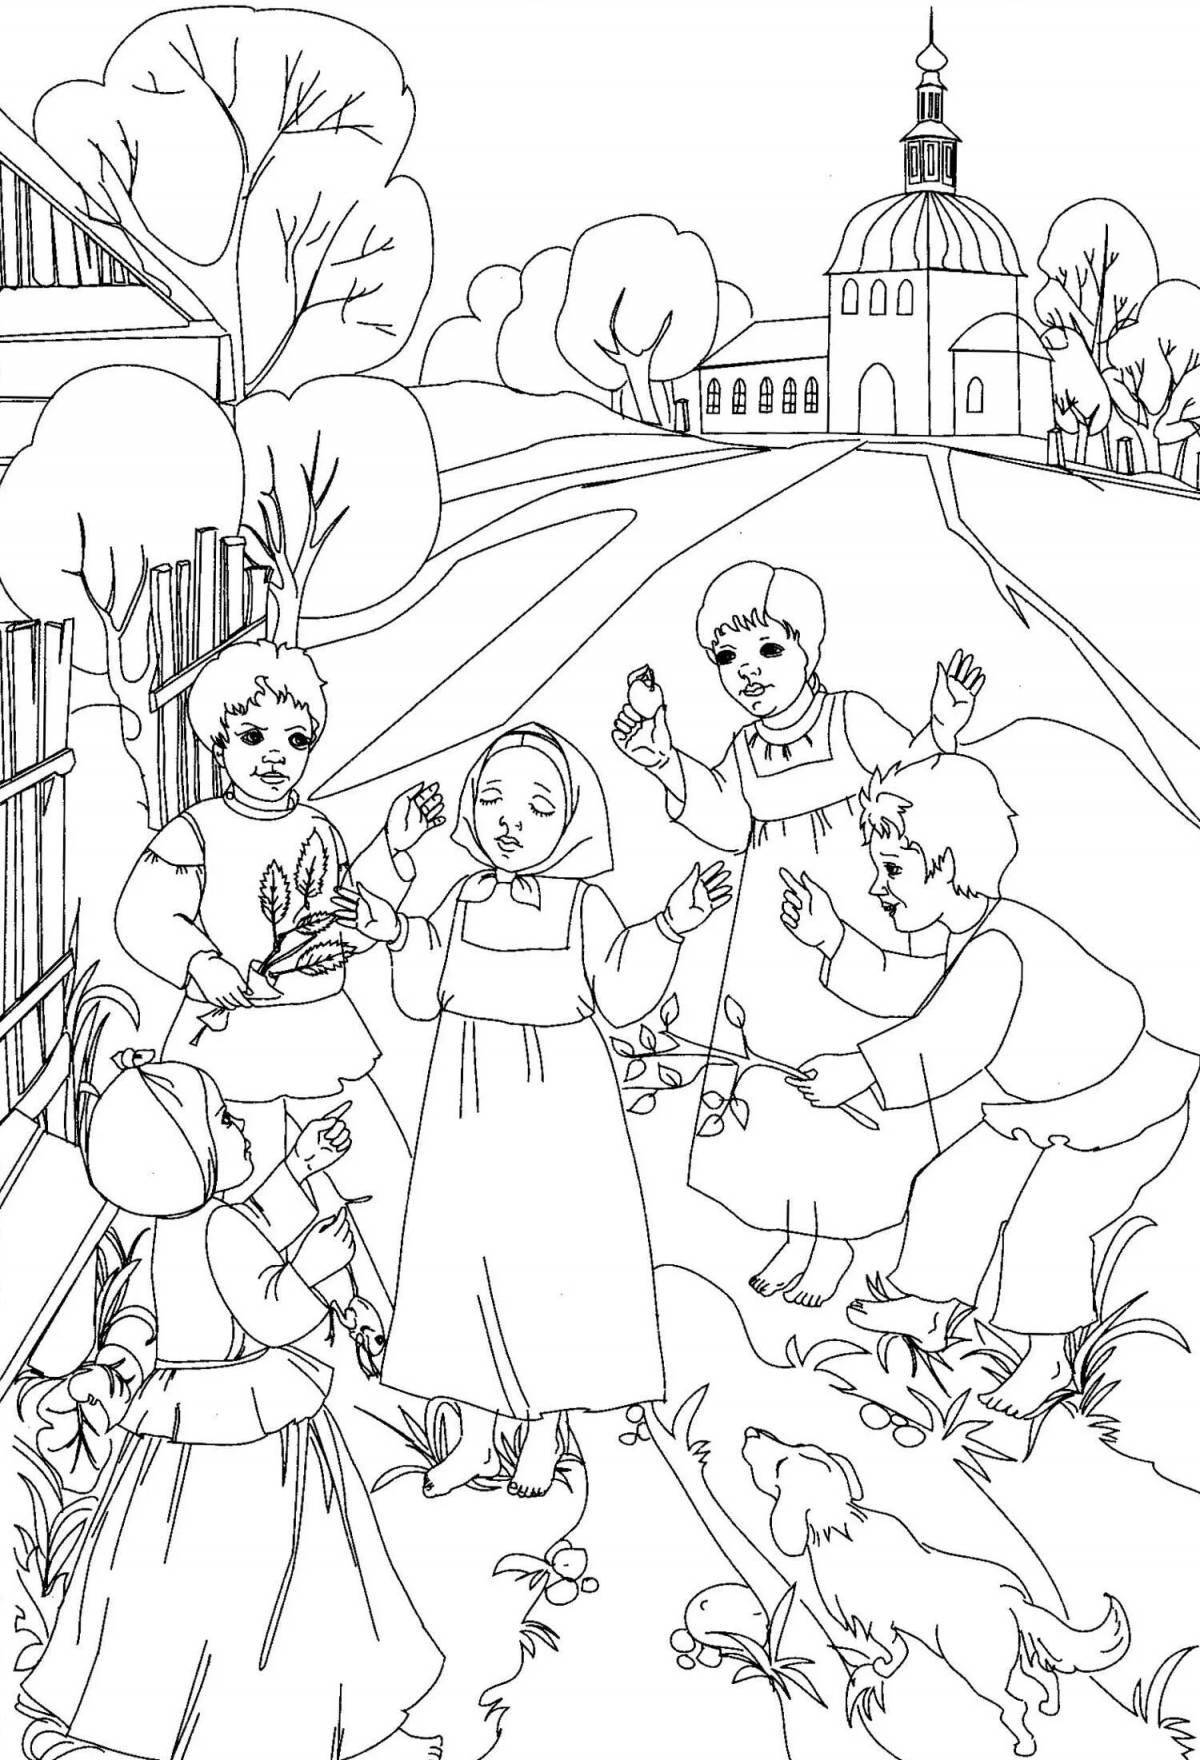 Coloring pages folk holidays